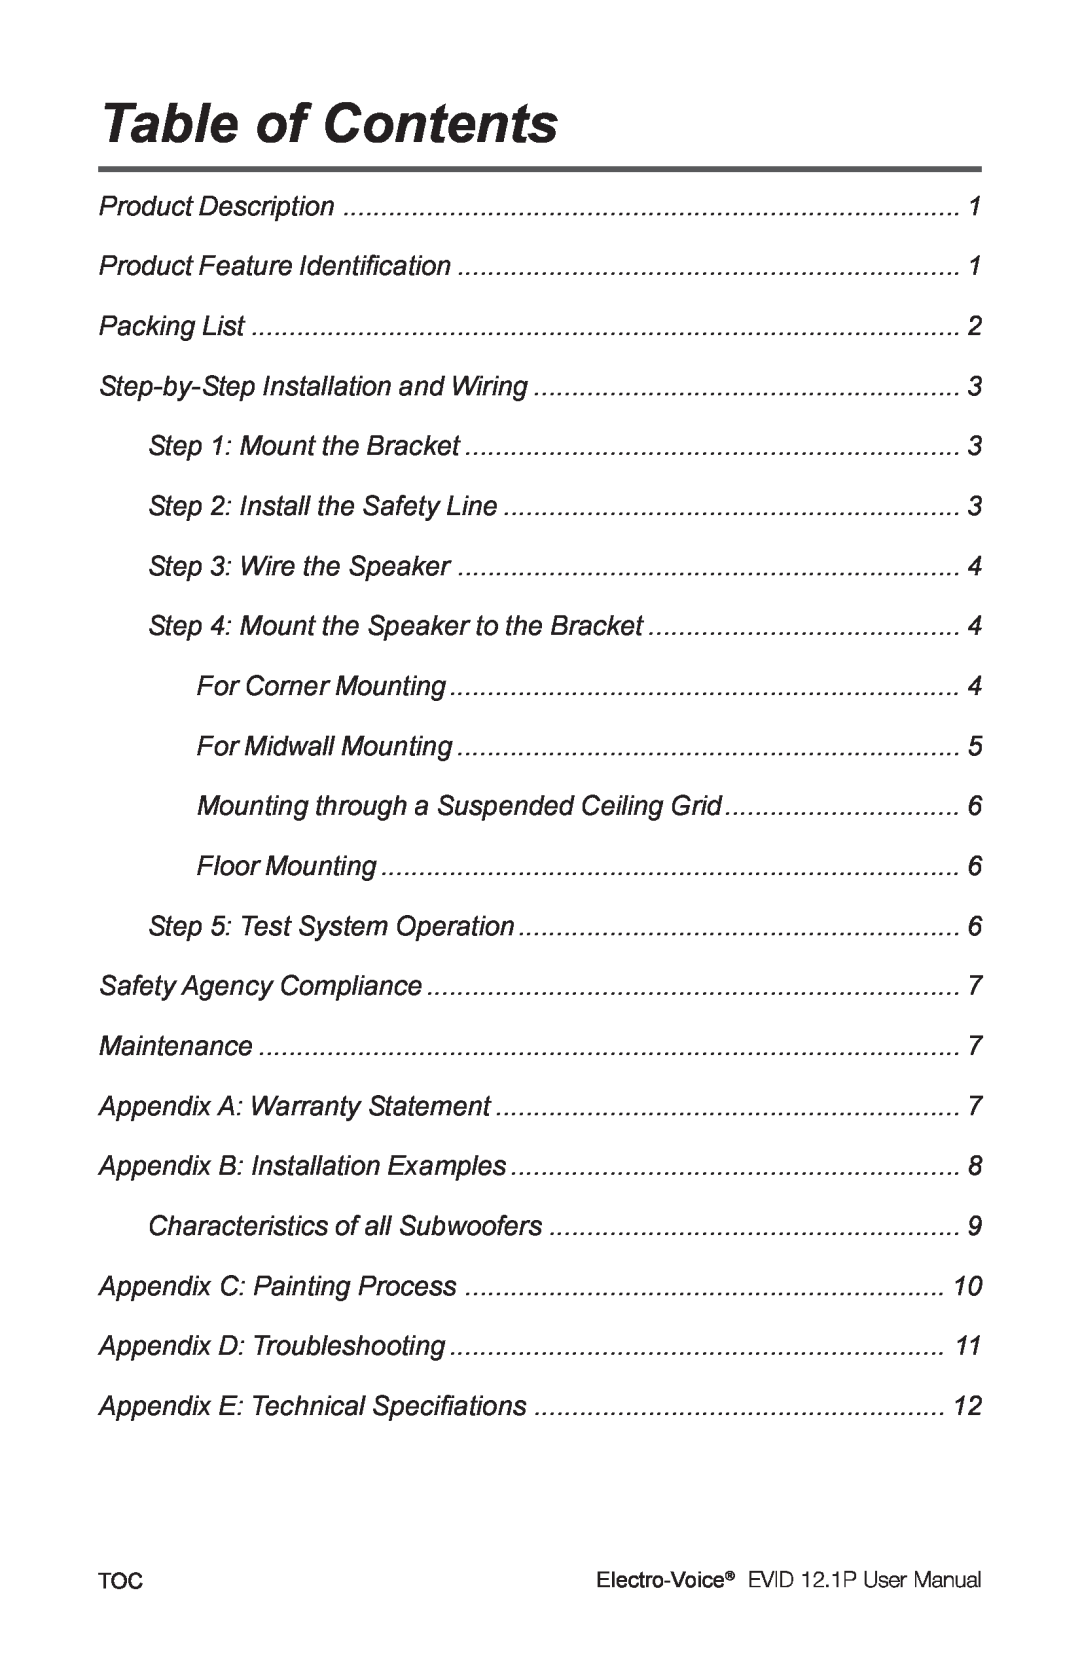 Electro-Voice 2.1P user manual Table of Contents 